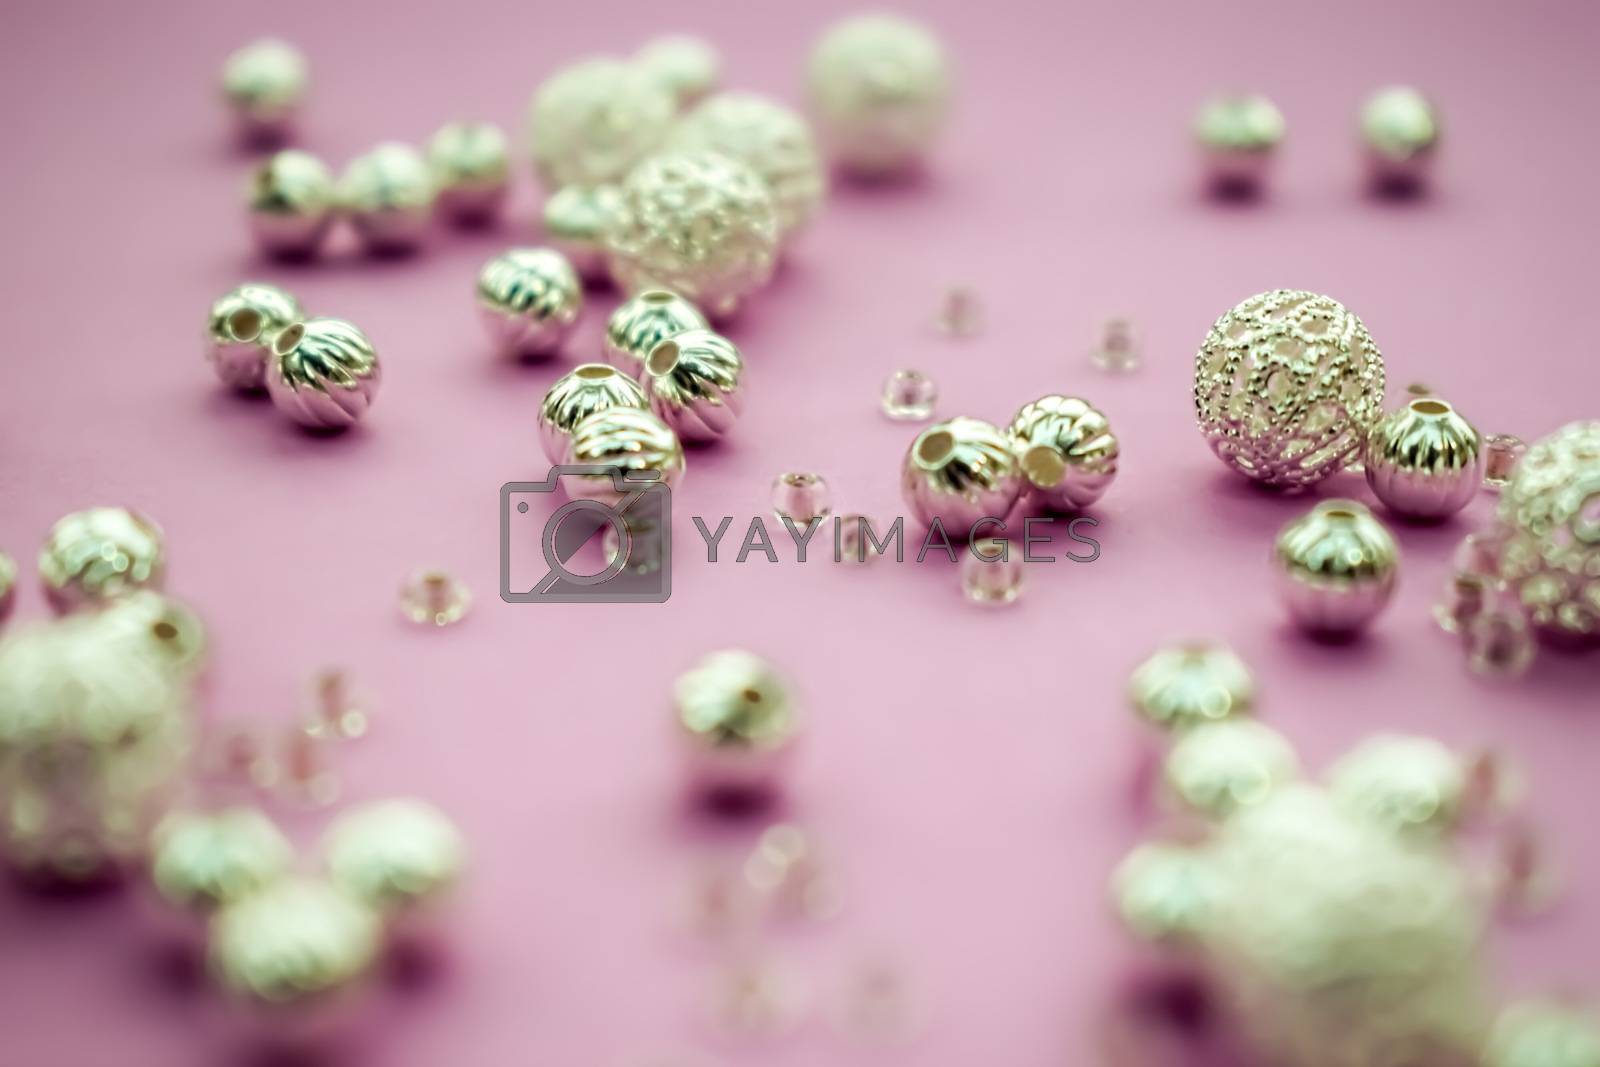 Royalty free image of selection of scattered silver beads on pink background by sarahdavies576@gmail.com